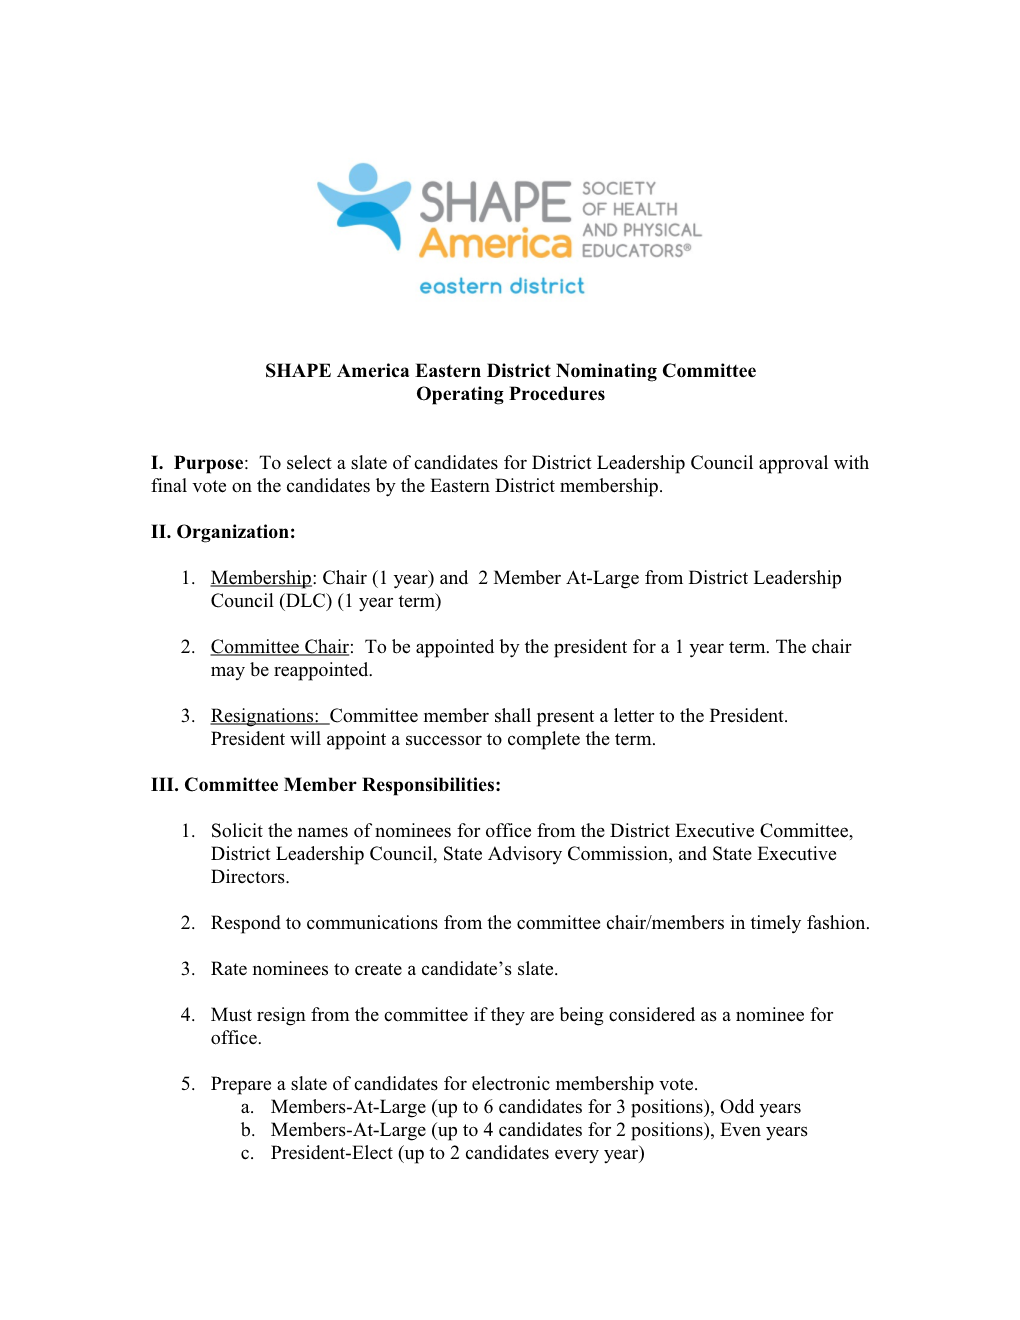 SHAPE America Eastern District Nominating Committee